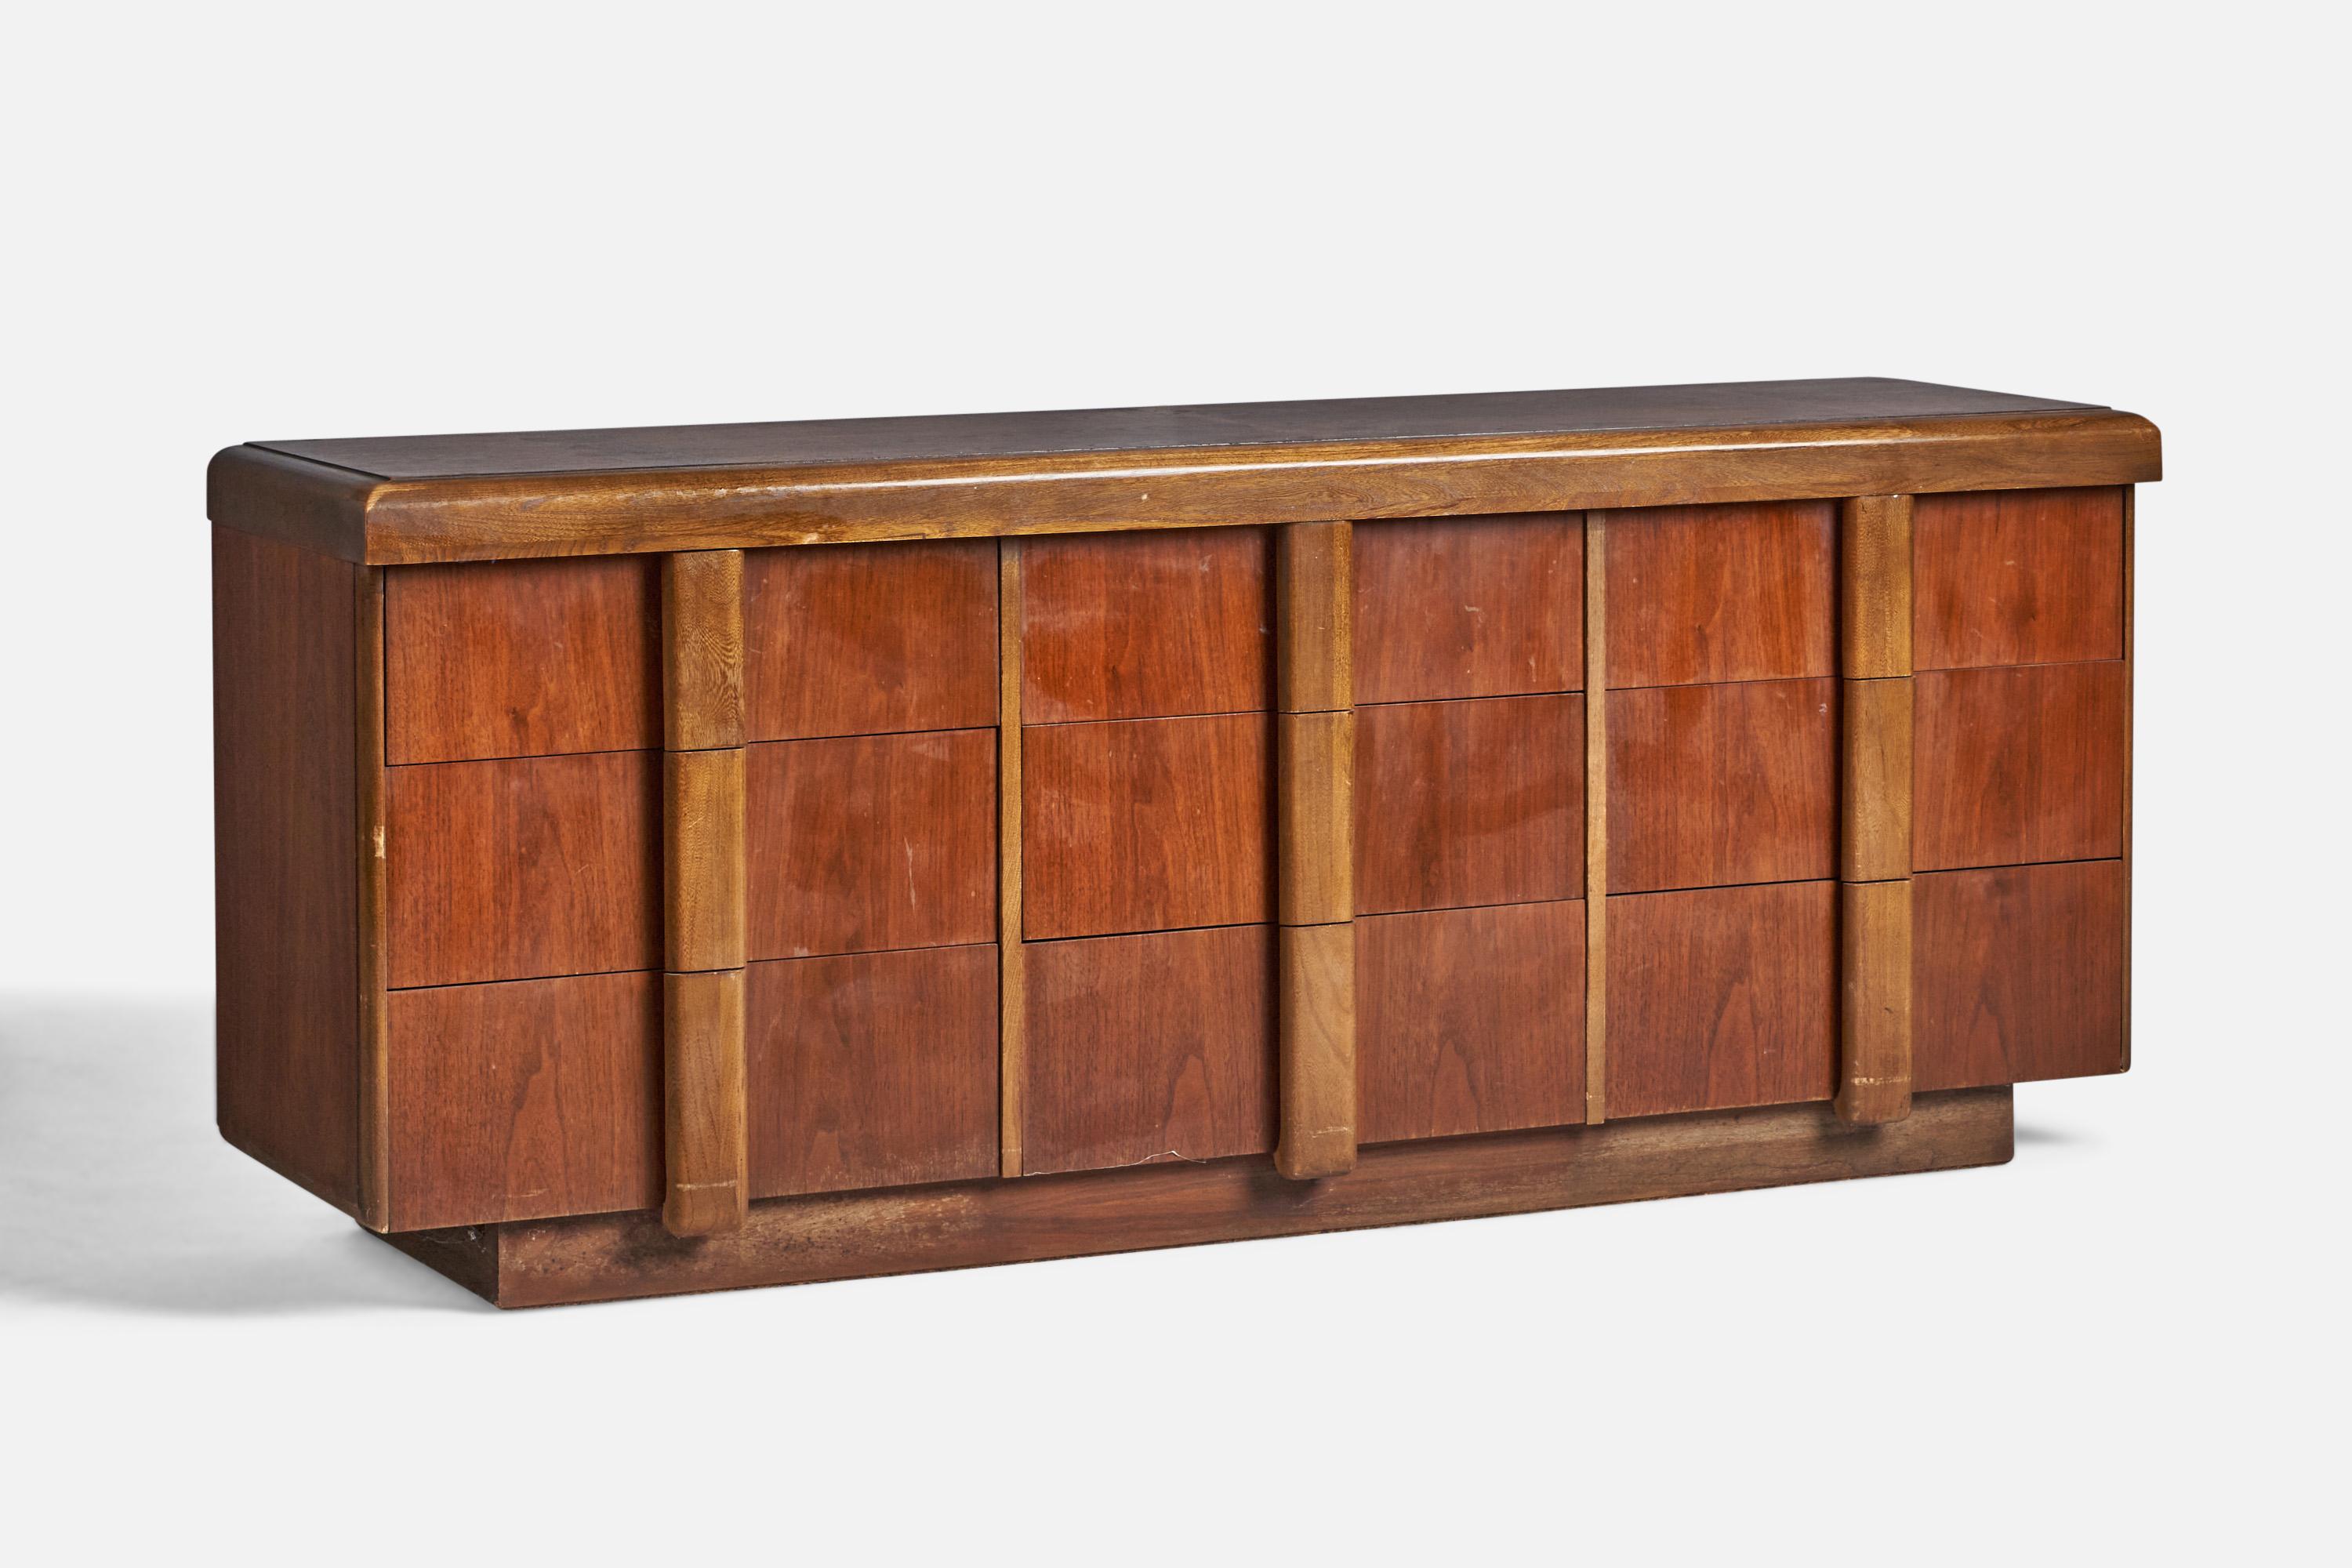 A walnut dresser designed and produced in the US, c. 1950s.